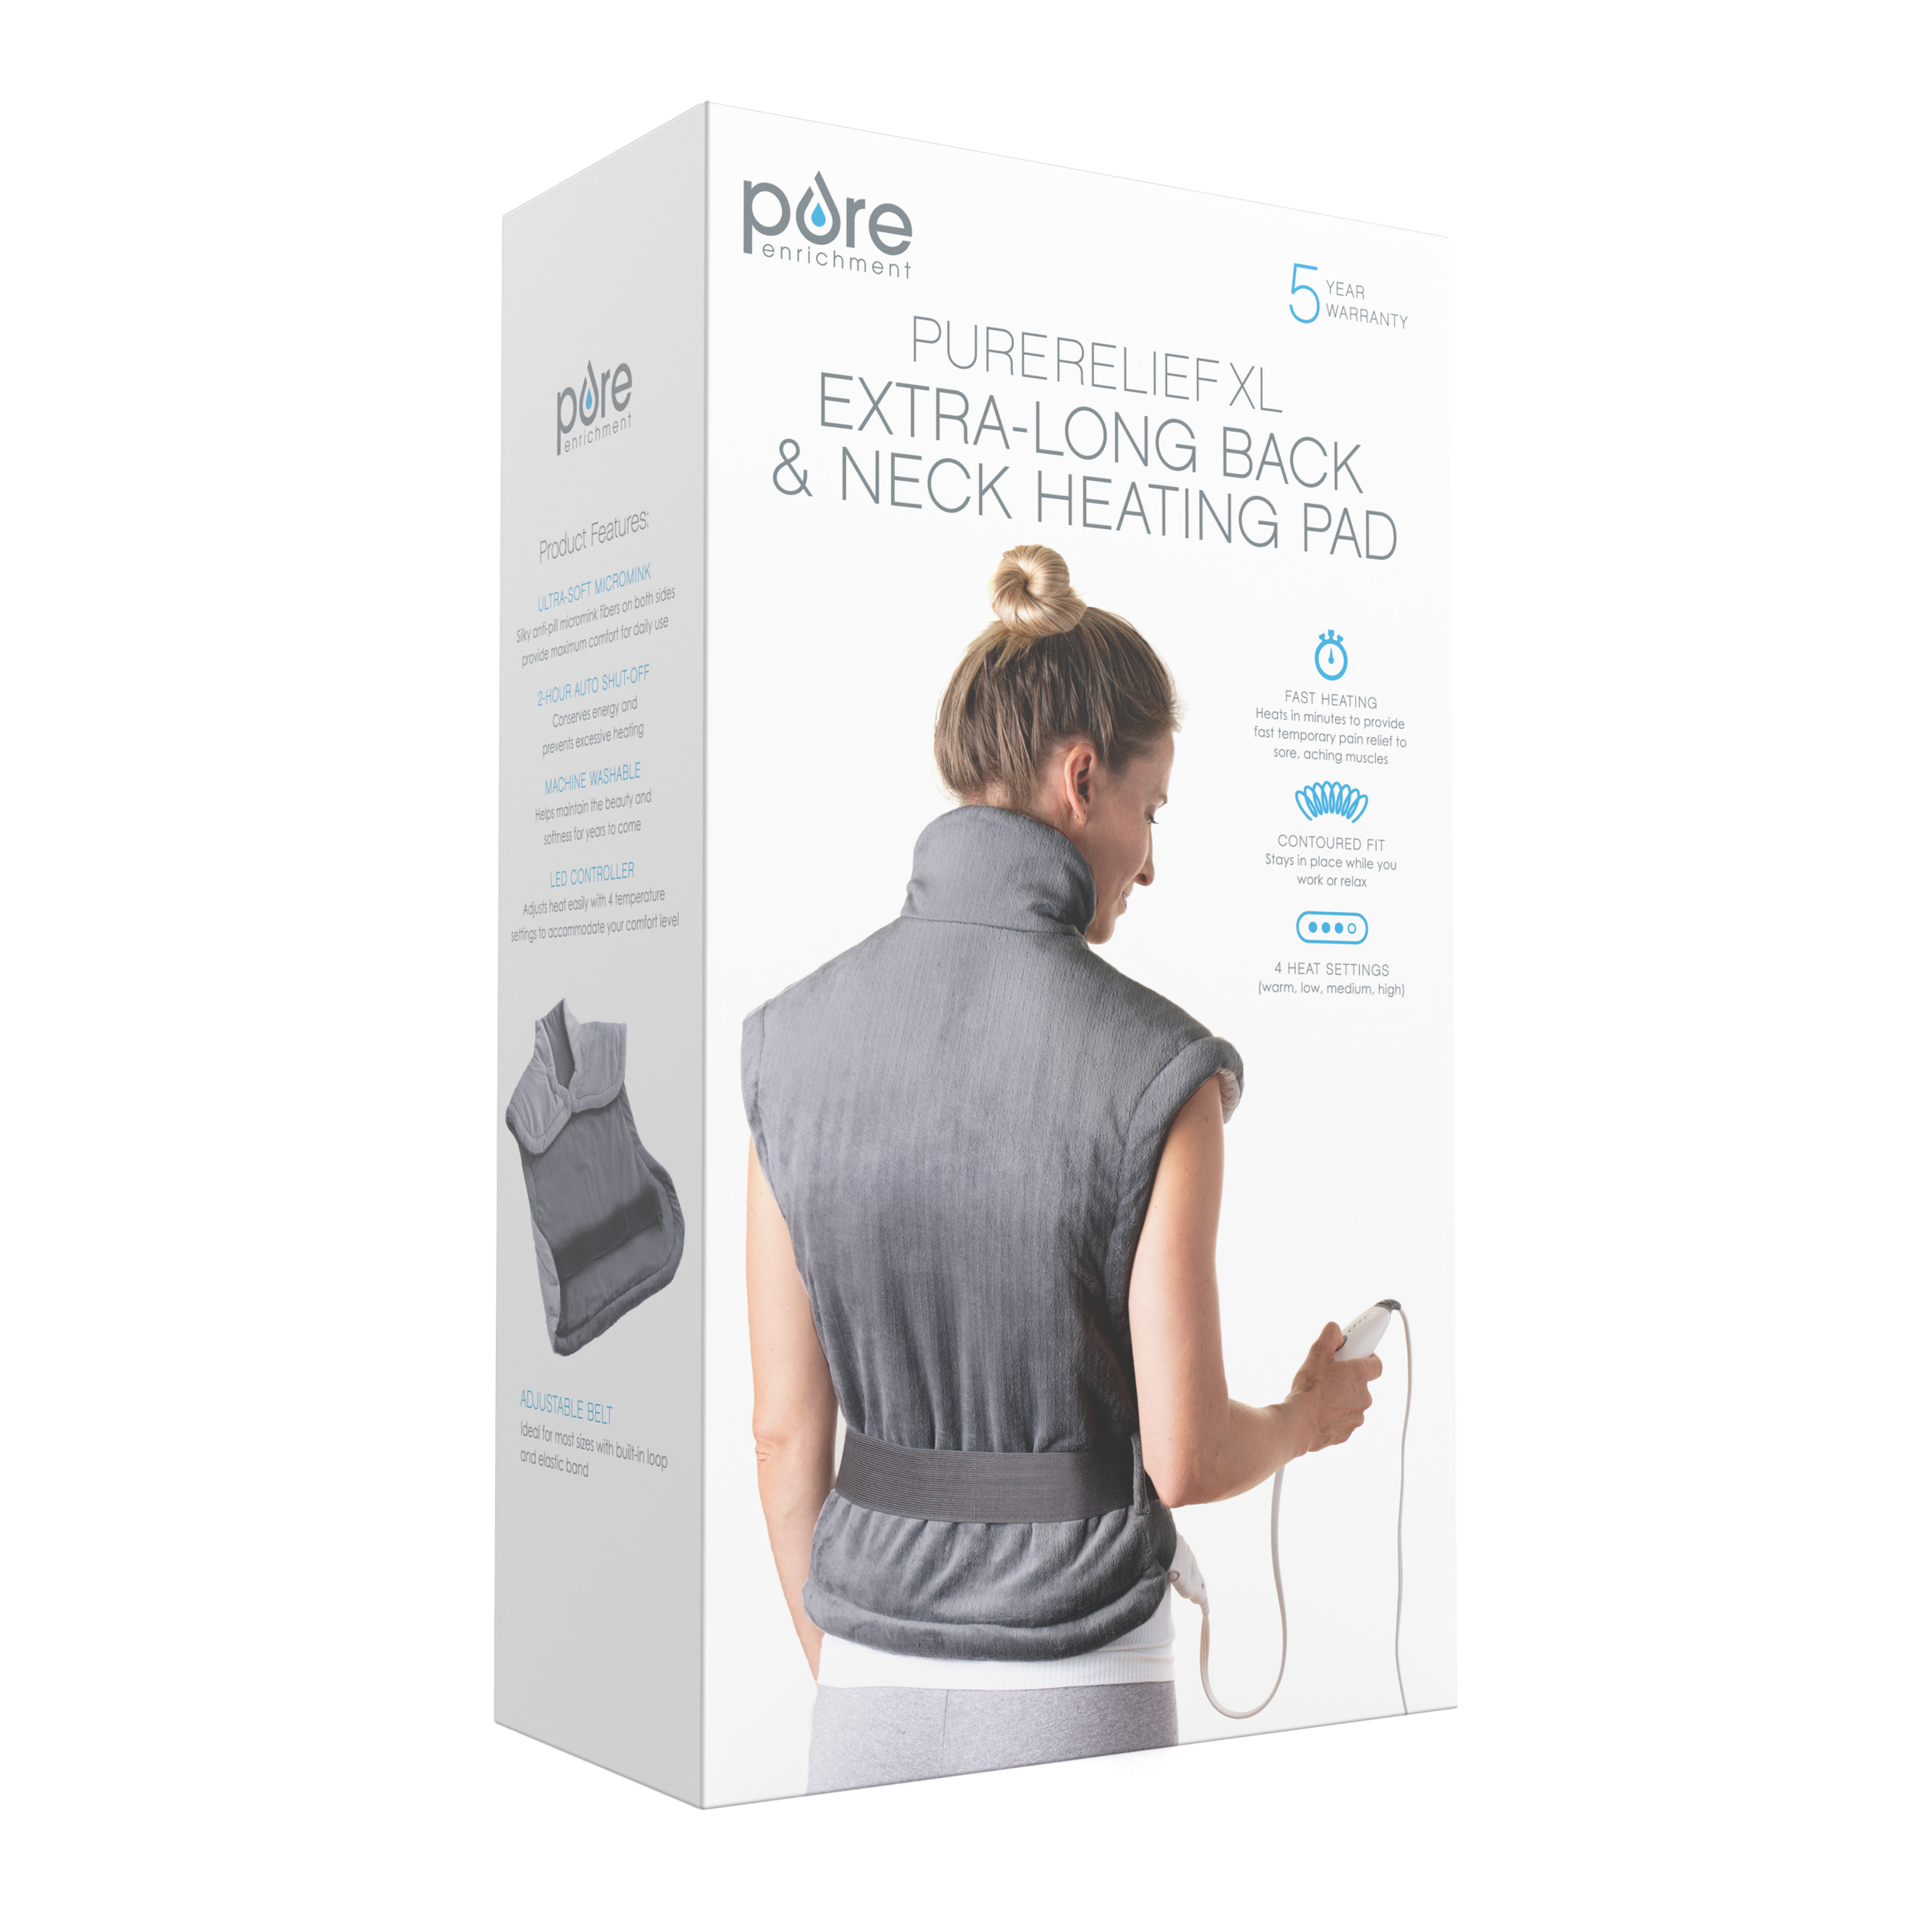 Pure Enrichment PureRelief XL Heating Pad for Back & Neck - Heat Therapy with 4 Heat Settings and Auto Shut-Off (Gray) - image 5 of 5